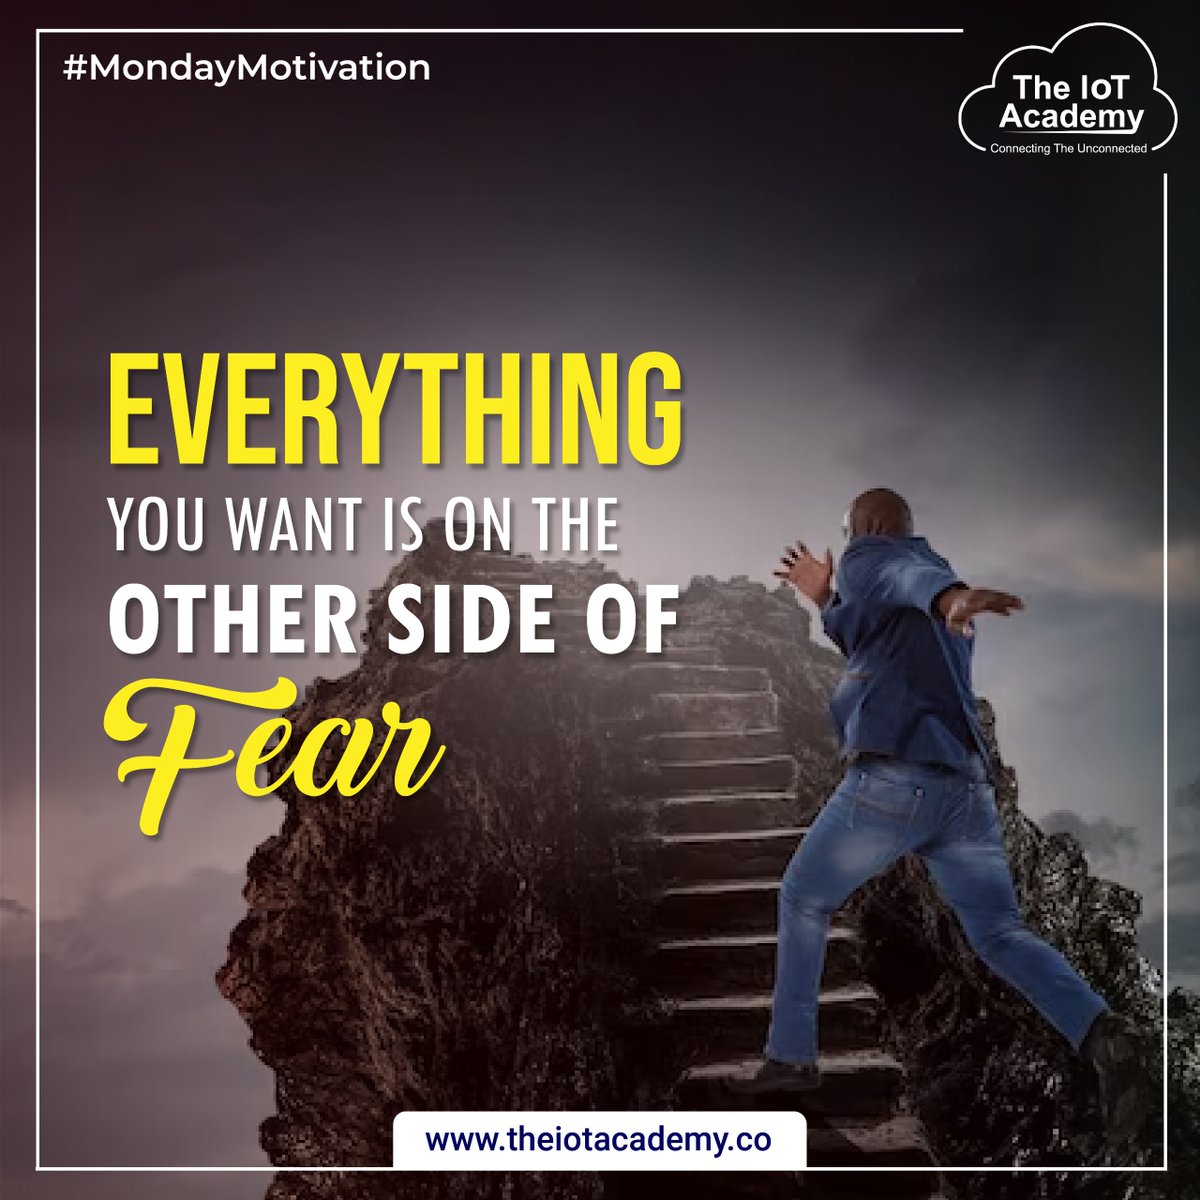 You will never be able to achieve everything you want in life unless you take risks and face your fears head-on.🎯💪🏻
.
.
.
#TheIoTAcademy #edtech #education #wildsouls #newweek #mondaymotivation #adventureslife #unleashpotential #mondayreminder #conqueryourday #mondayblues